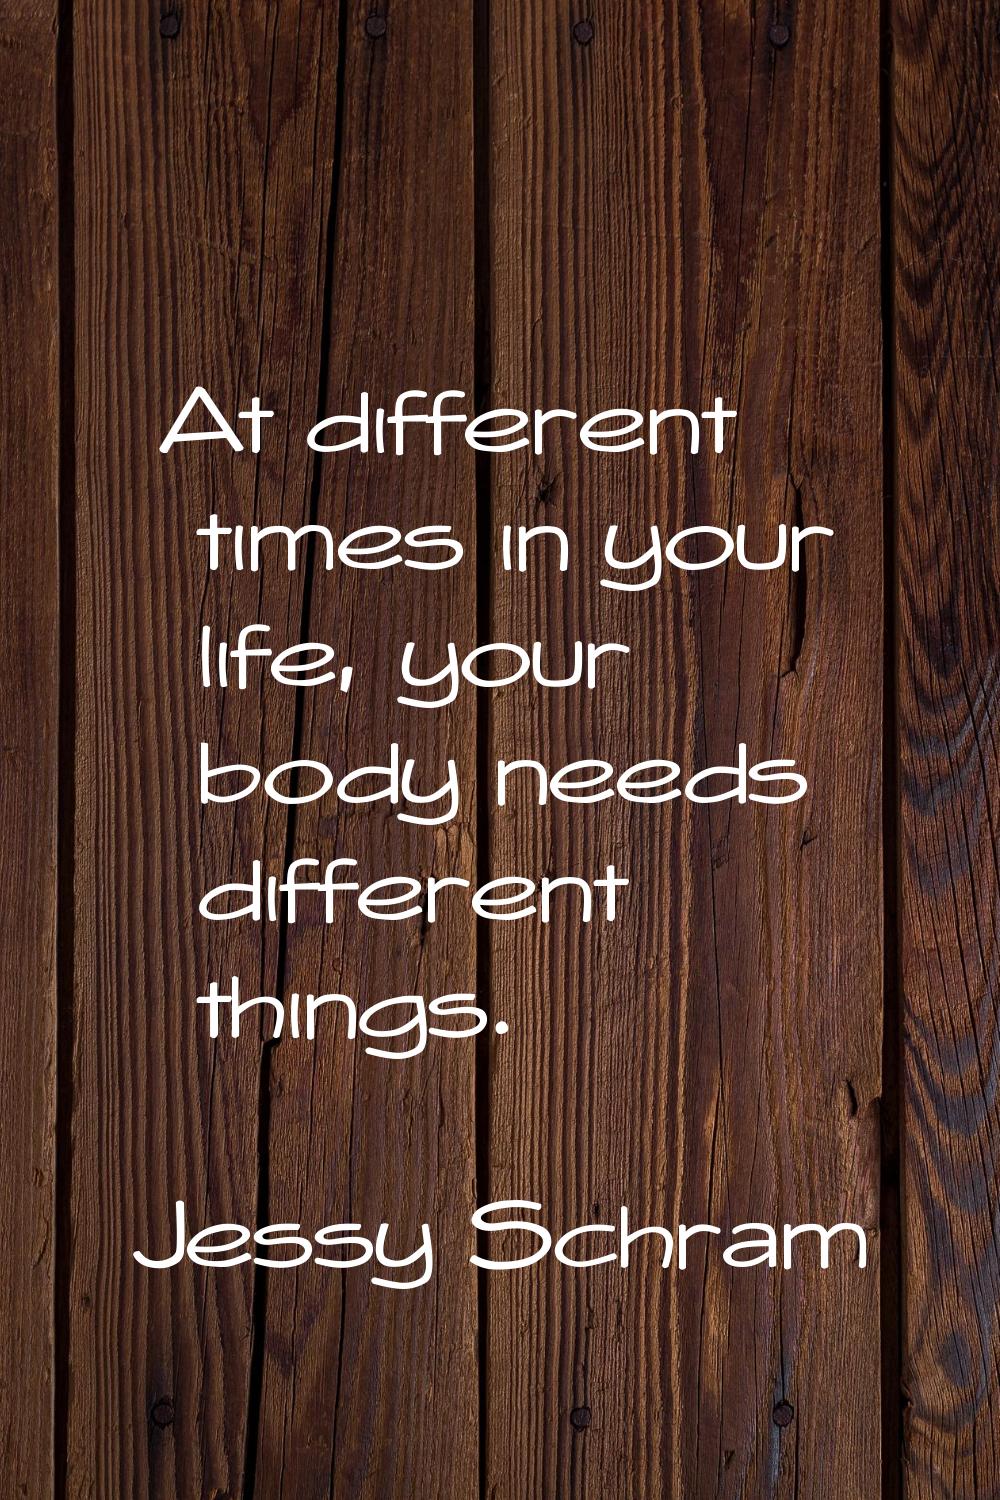 At different times in your life, your body needs different things.